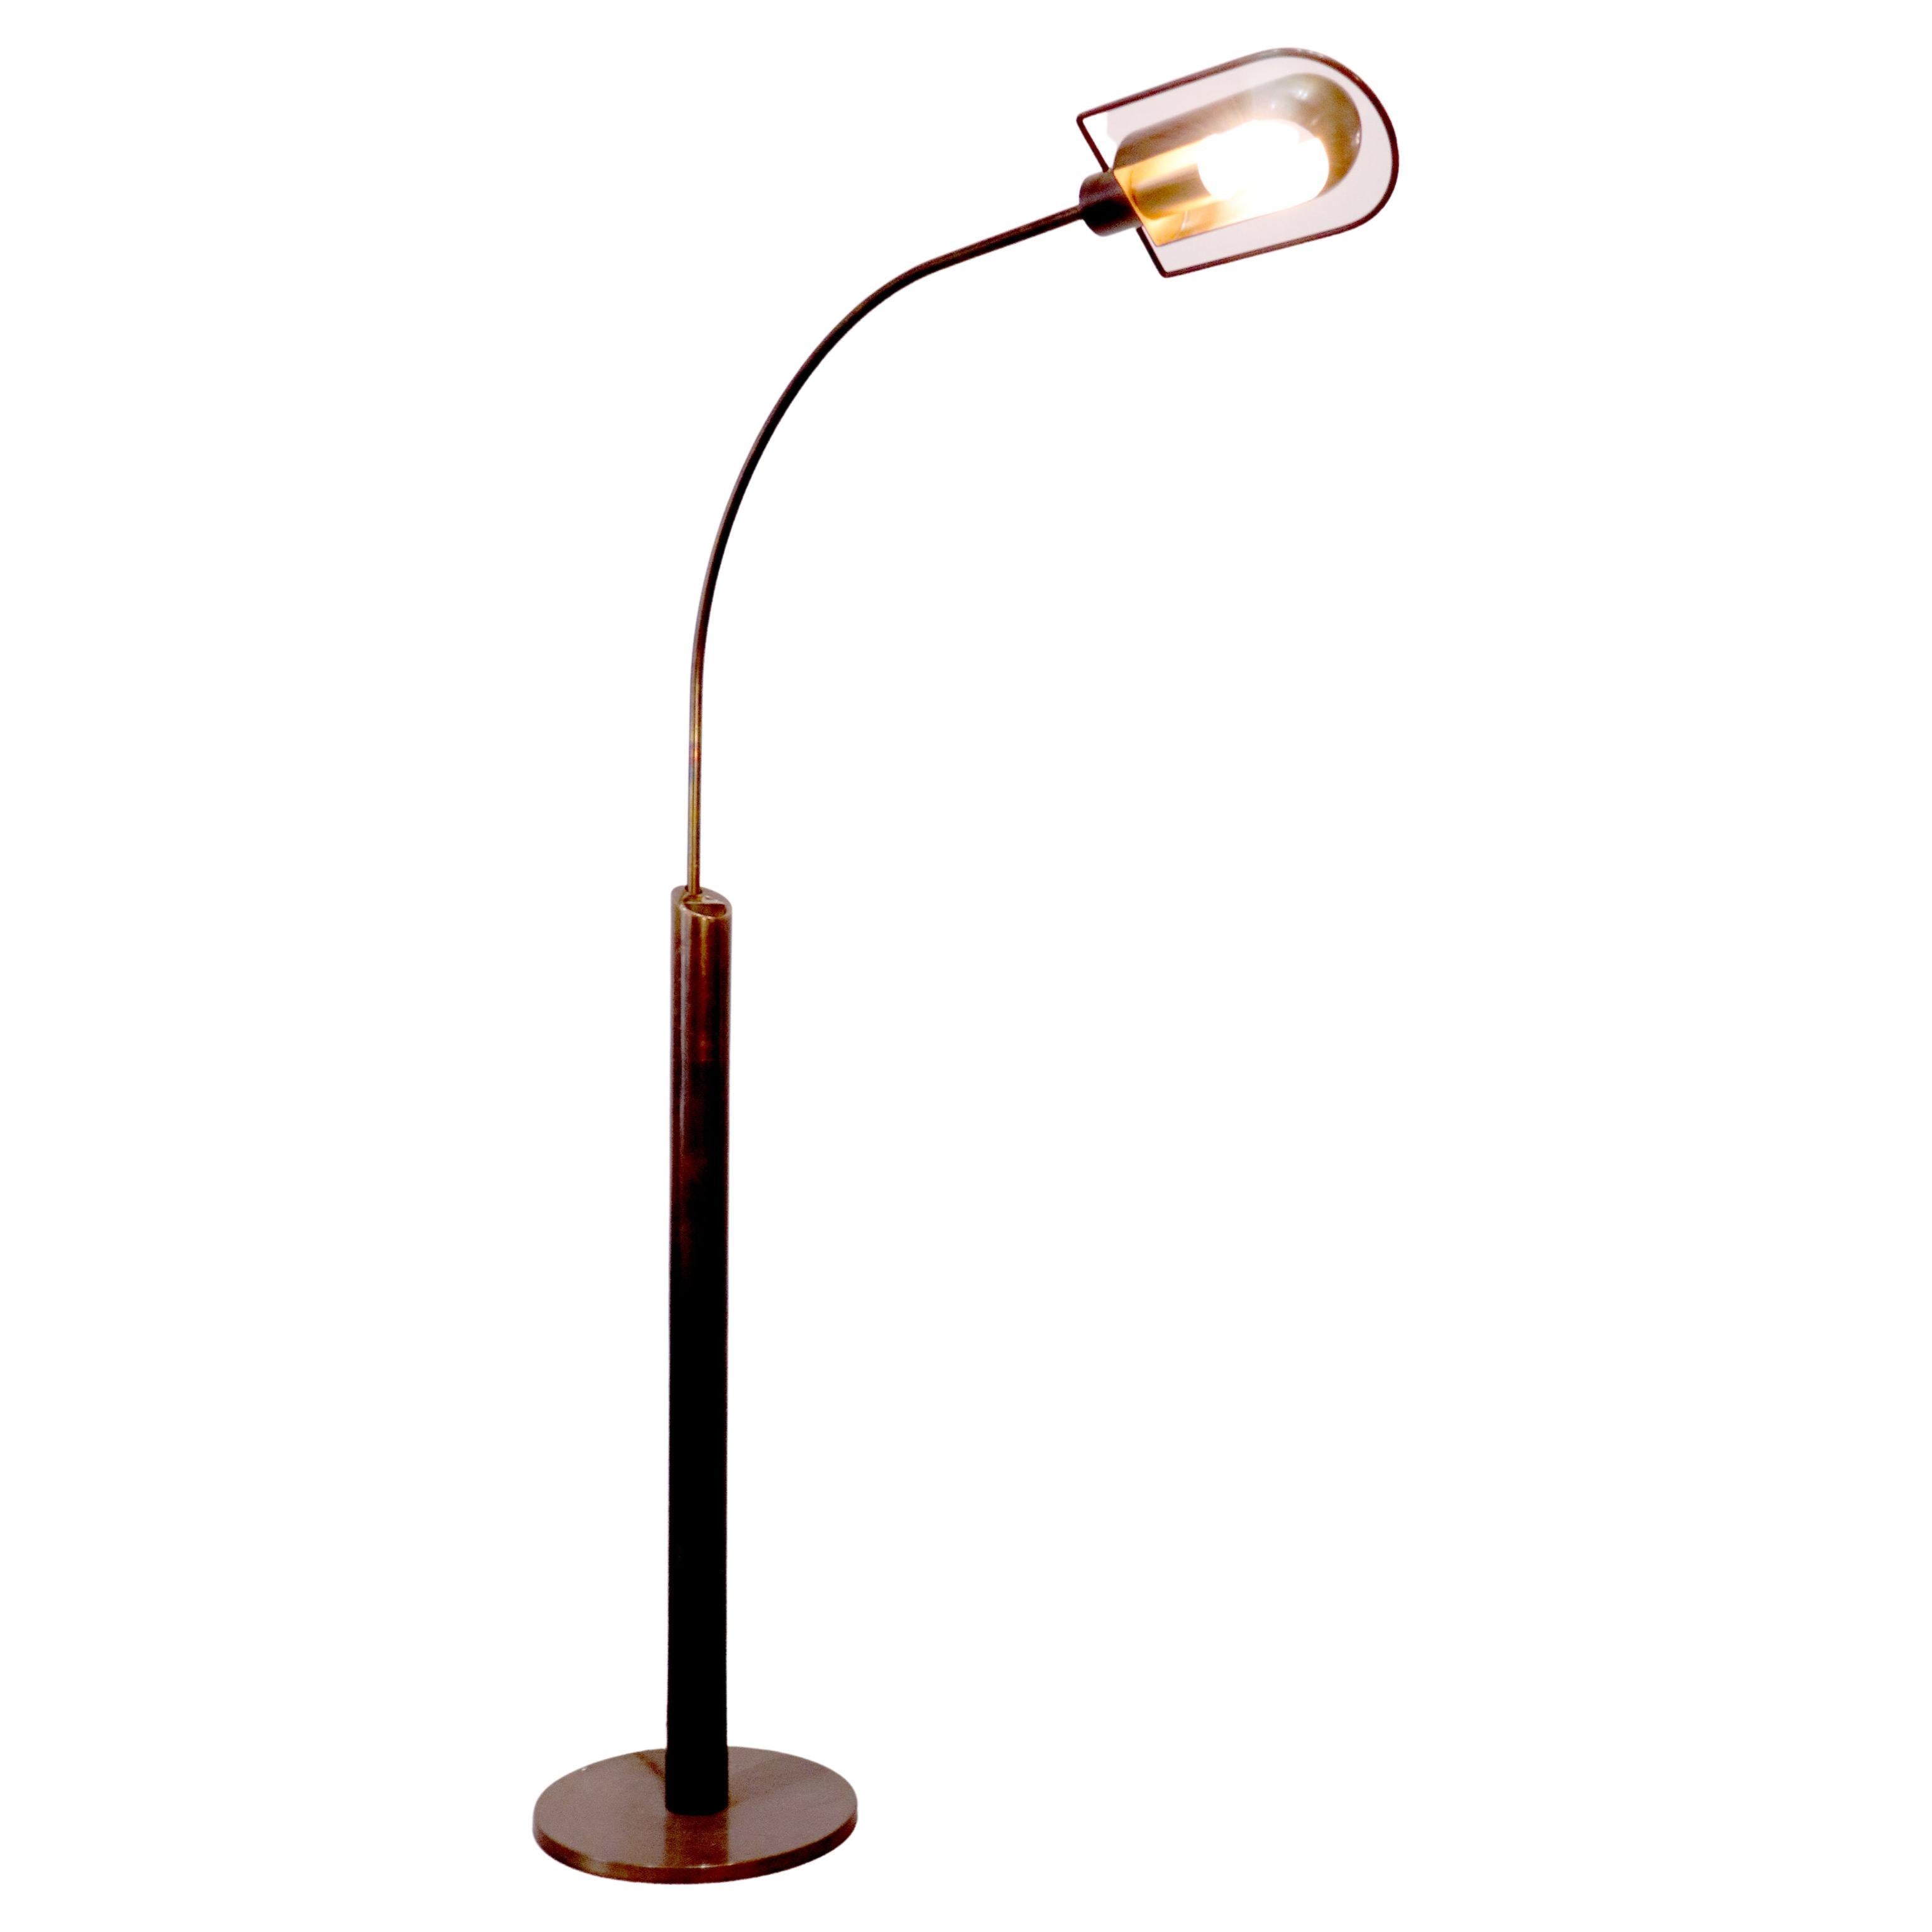 Rare Mid Century Brass Arch Floor Lamp by Florian Shulz, Germany, 1970s For Sale